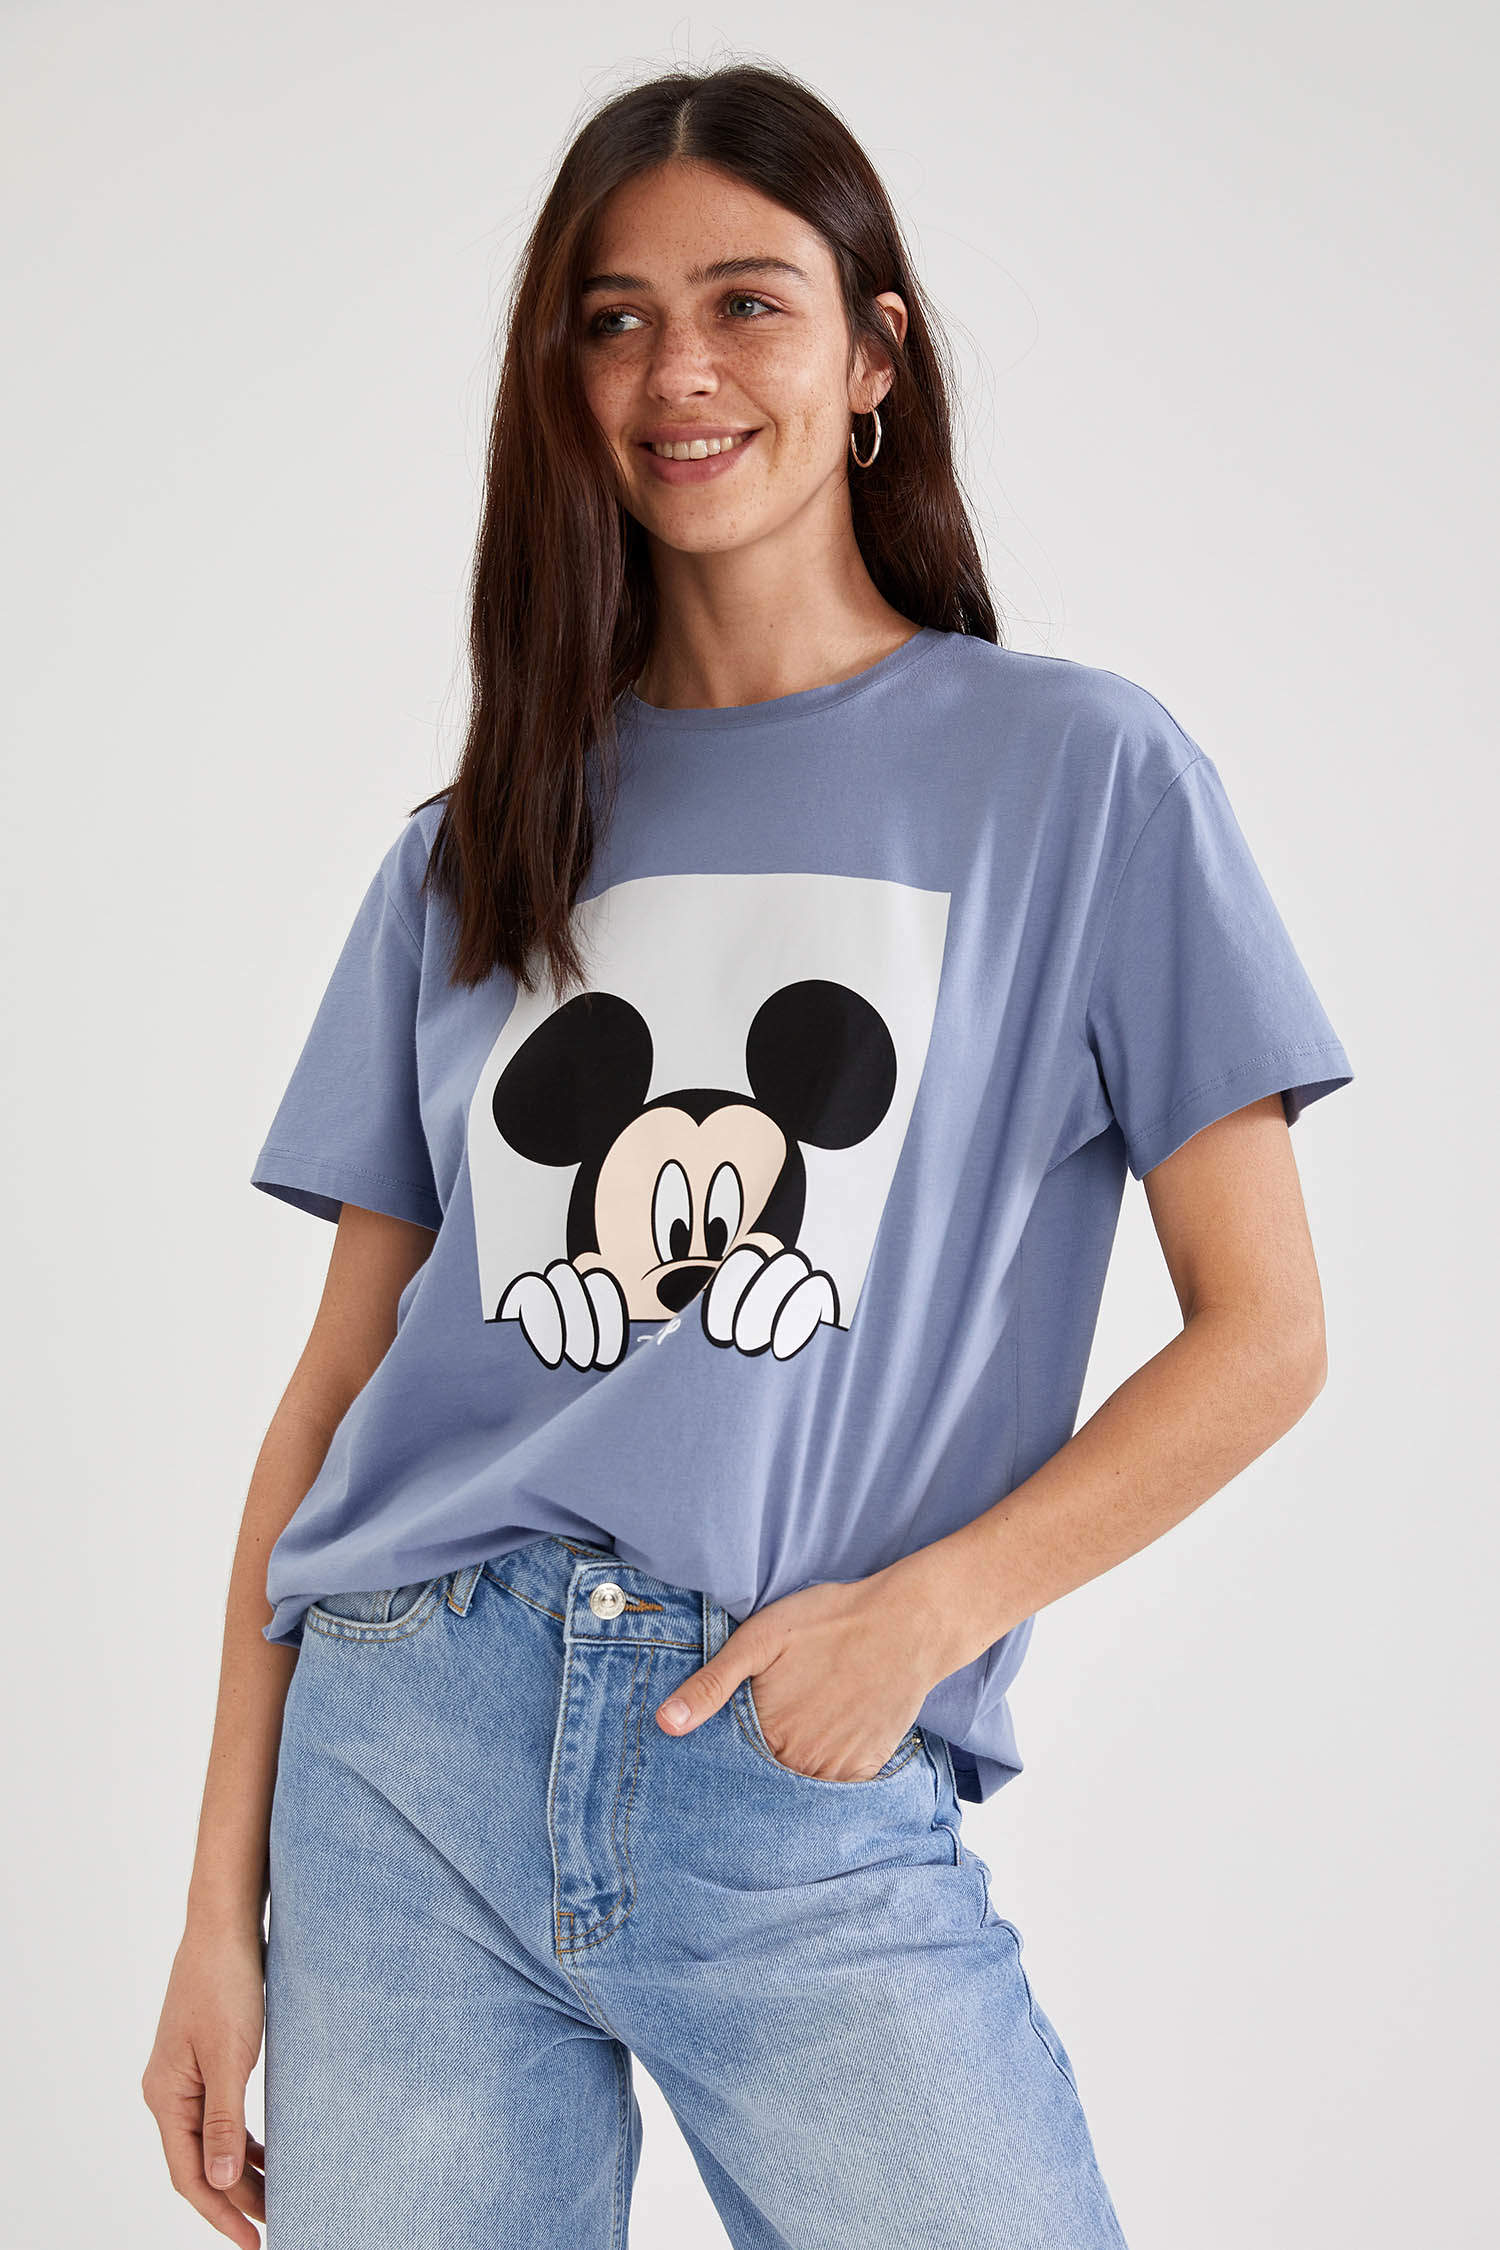 Blue WOMAN Oversized 'Mickey Mouse' Short-Sleeved T-Shirt 1916079 | DeFacto